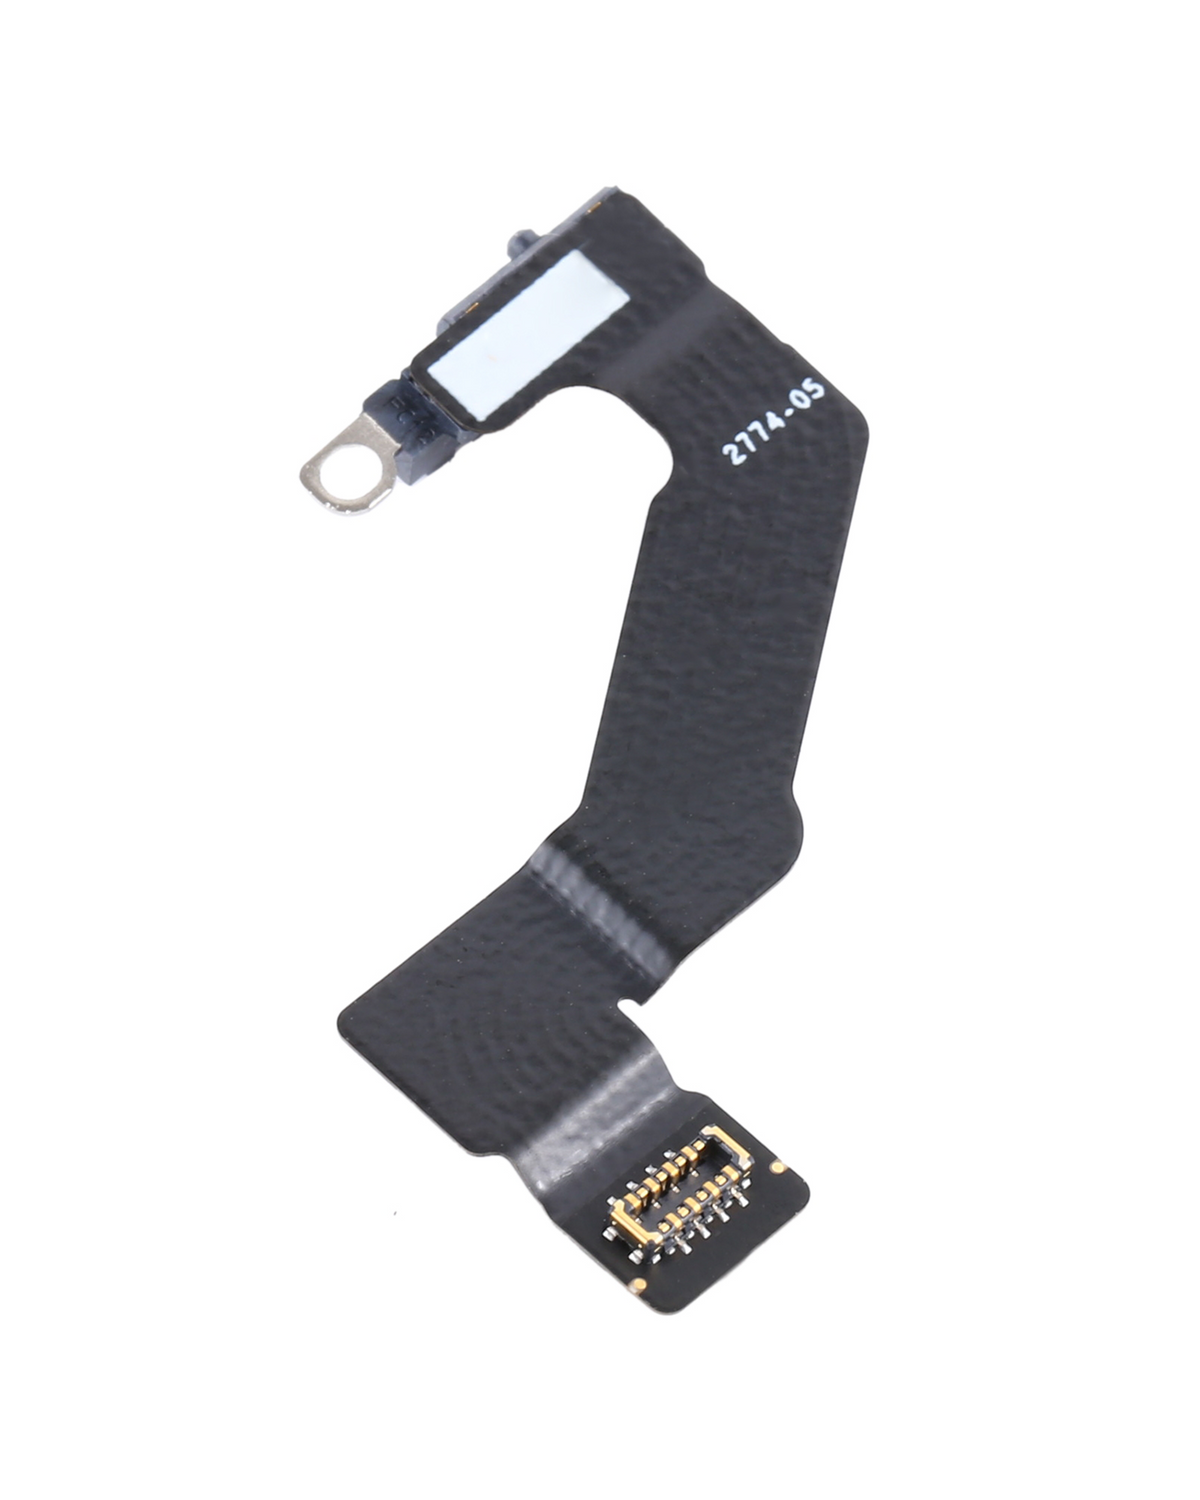 5G NANO SIGNAL CABLE COMPATIBLE WITH IPHONE 12 MINI